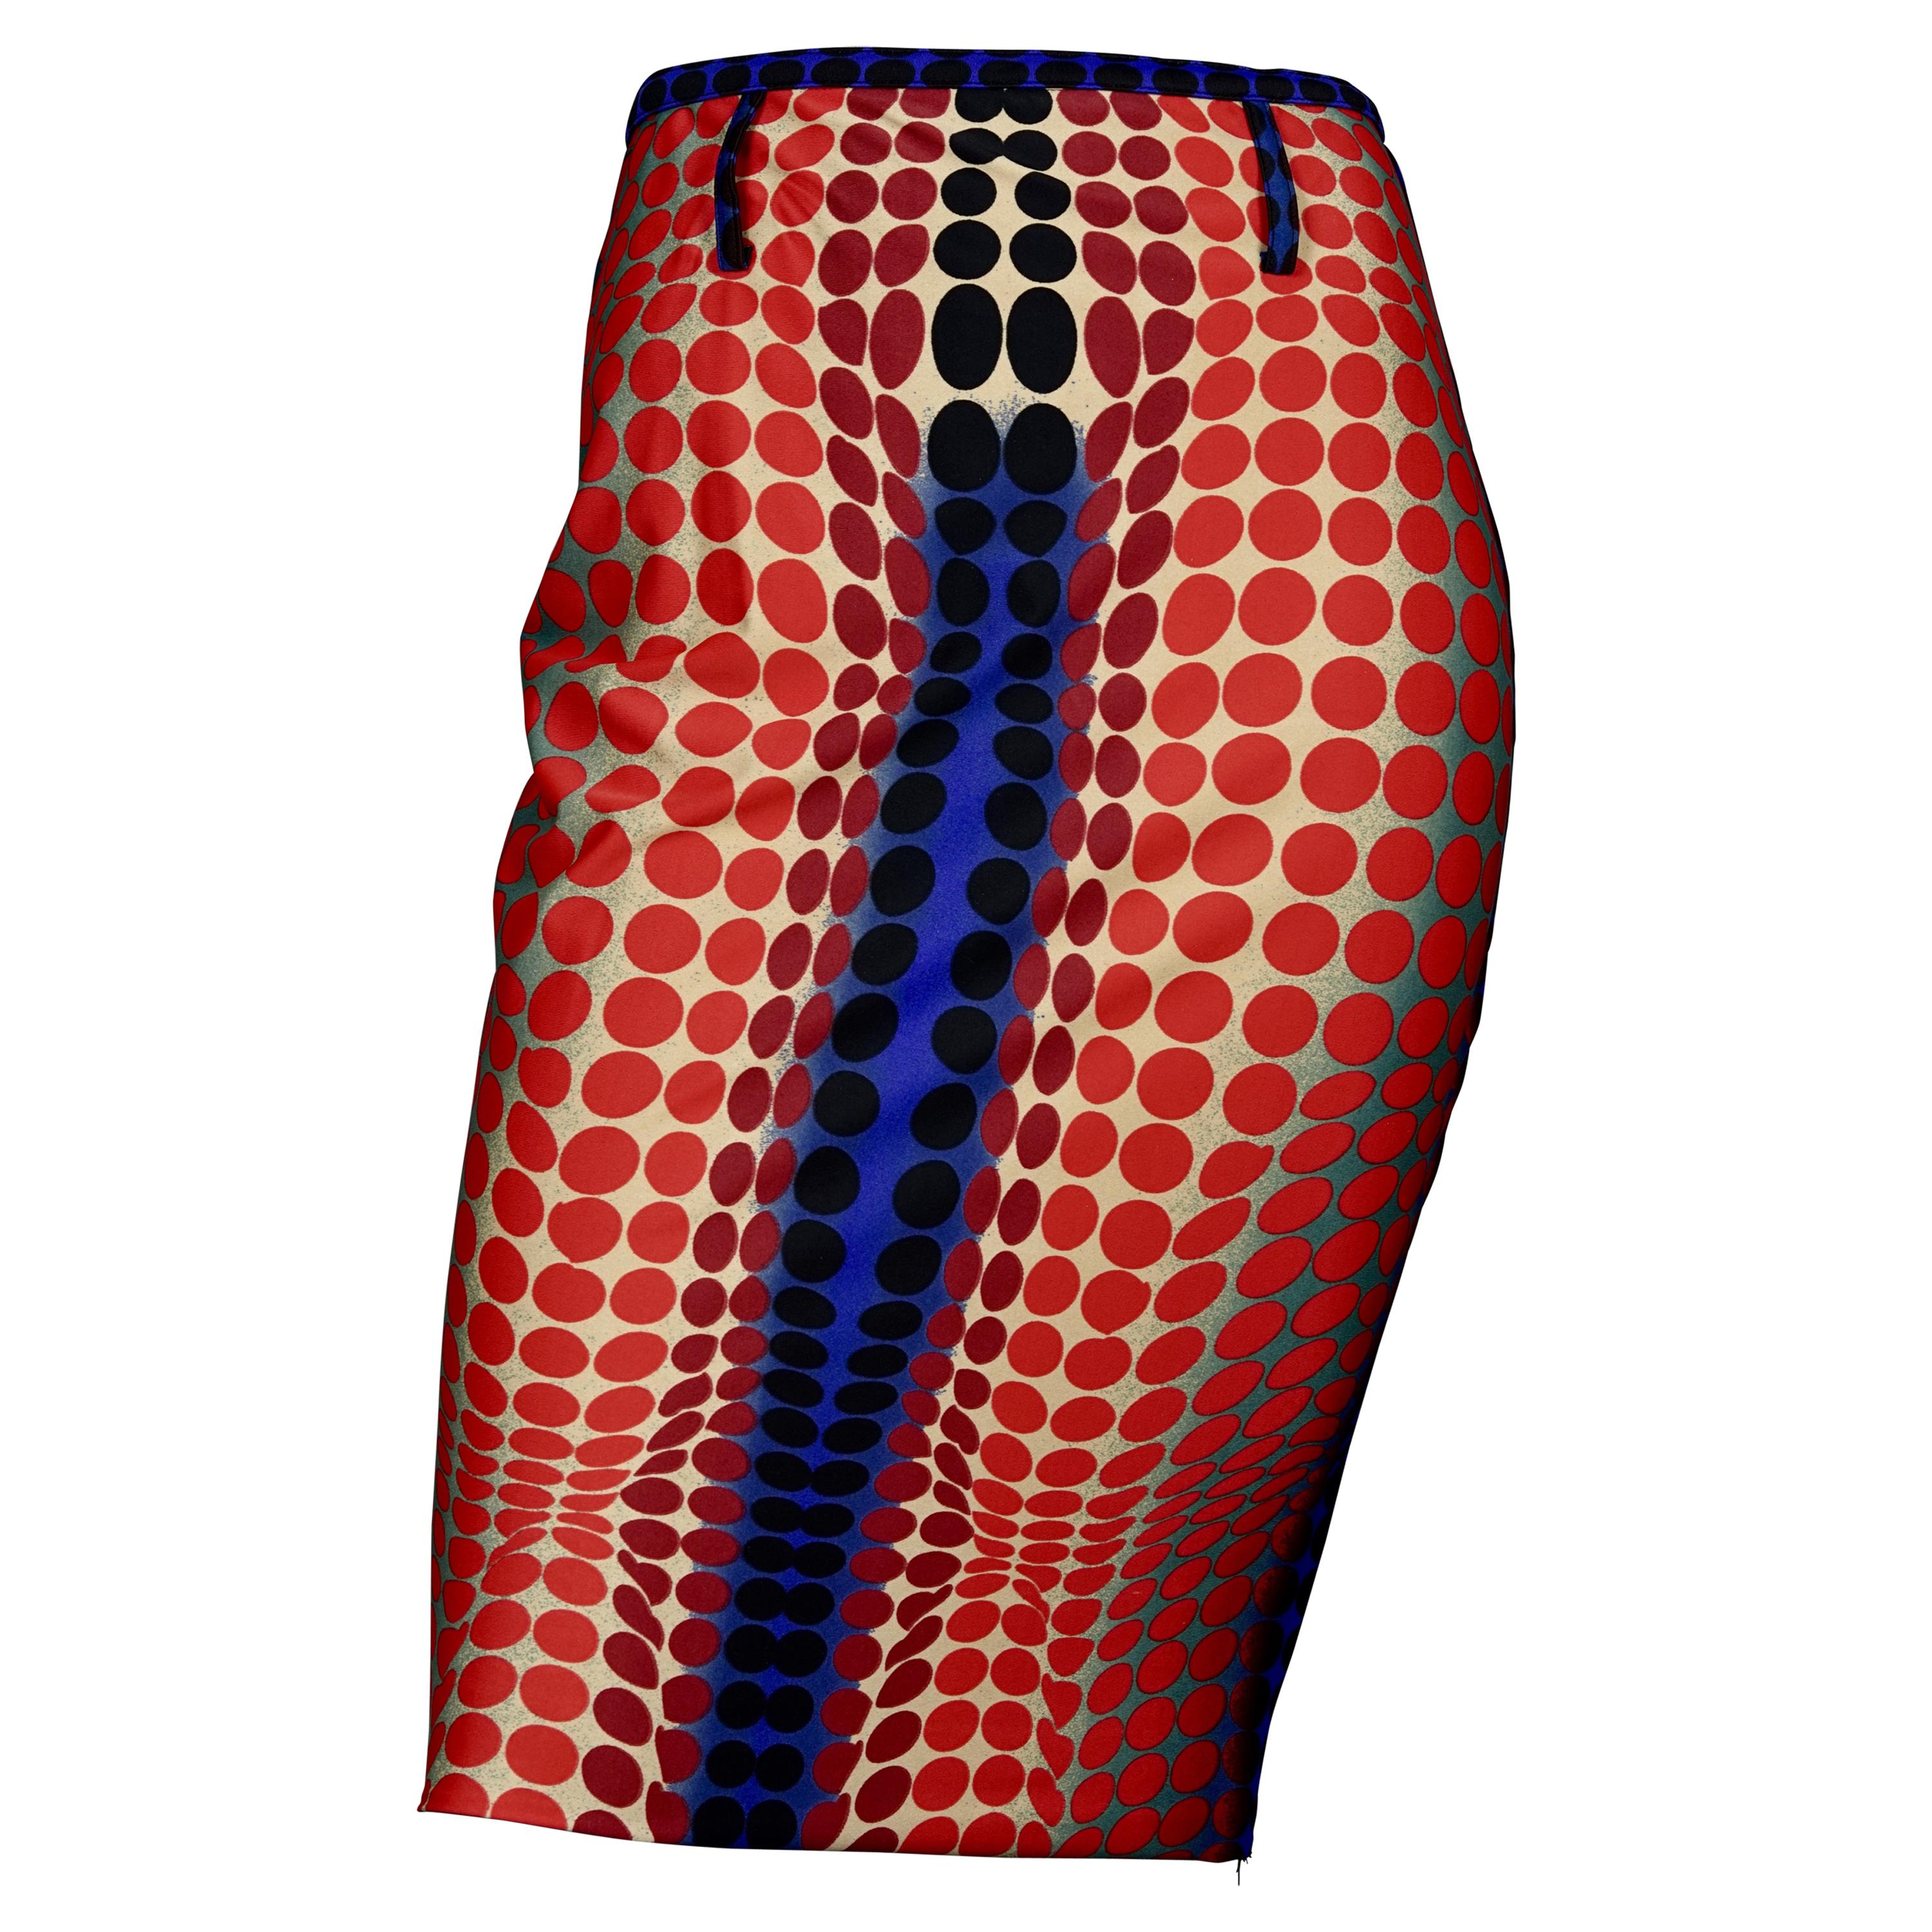 Vintage 1996 JEAN PAUL GAULTIER Cyberbaba Optic Illusion Skirt by Victor Vasarel